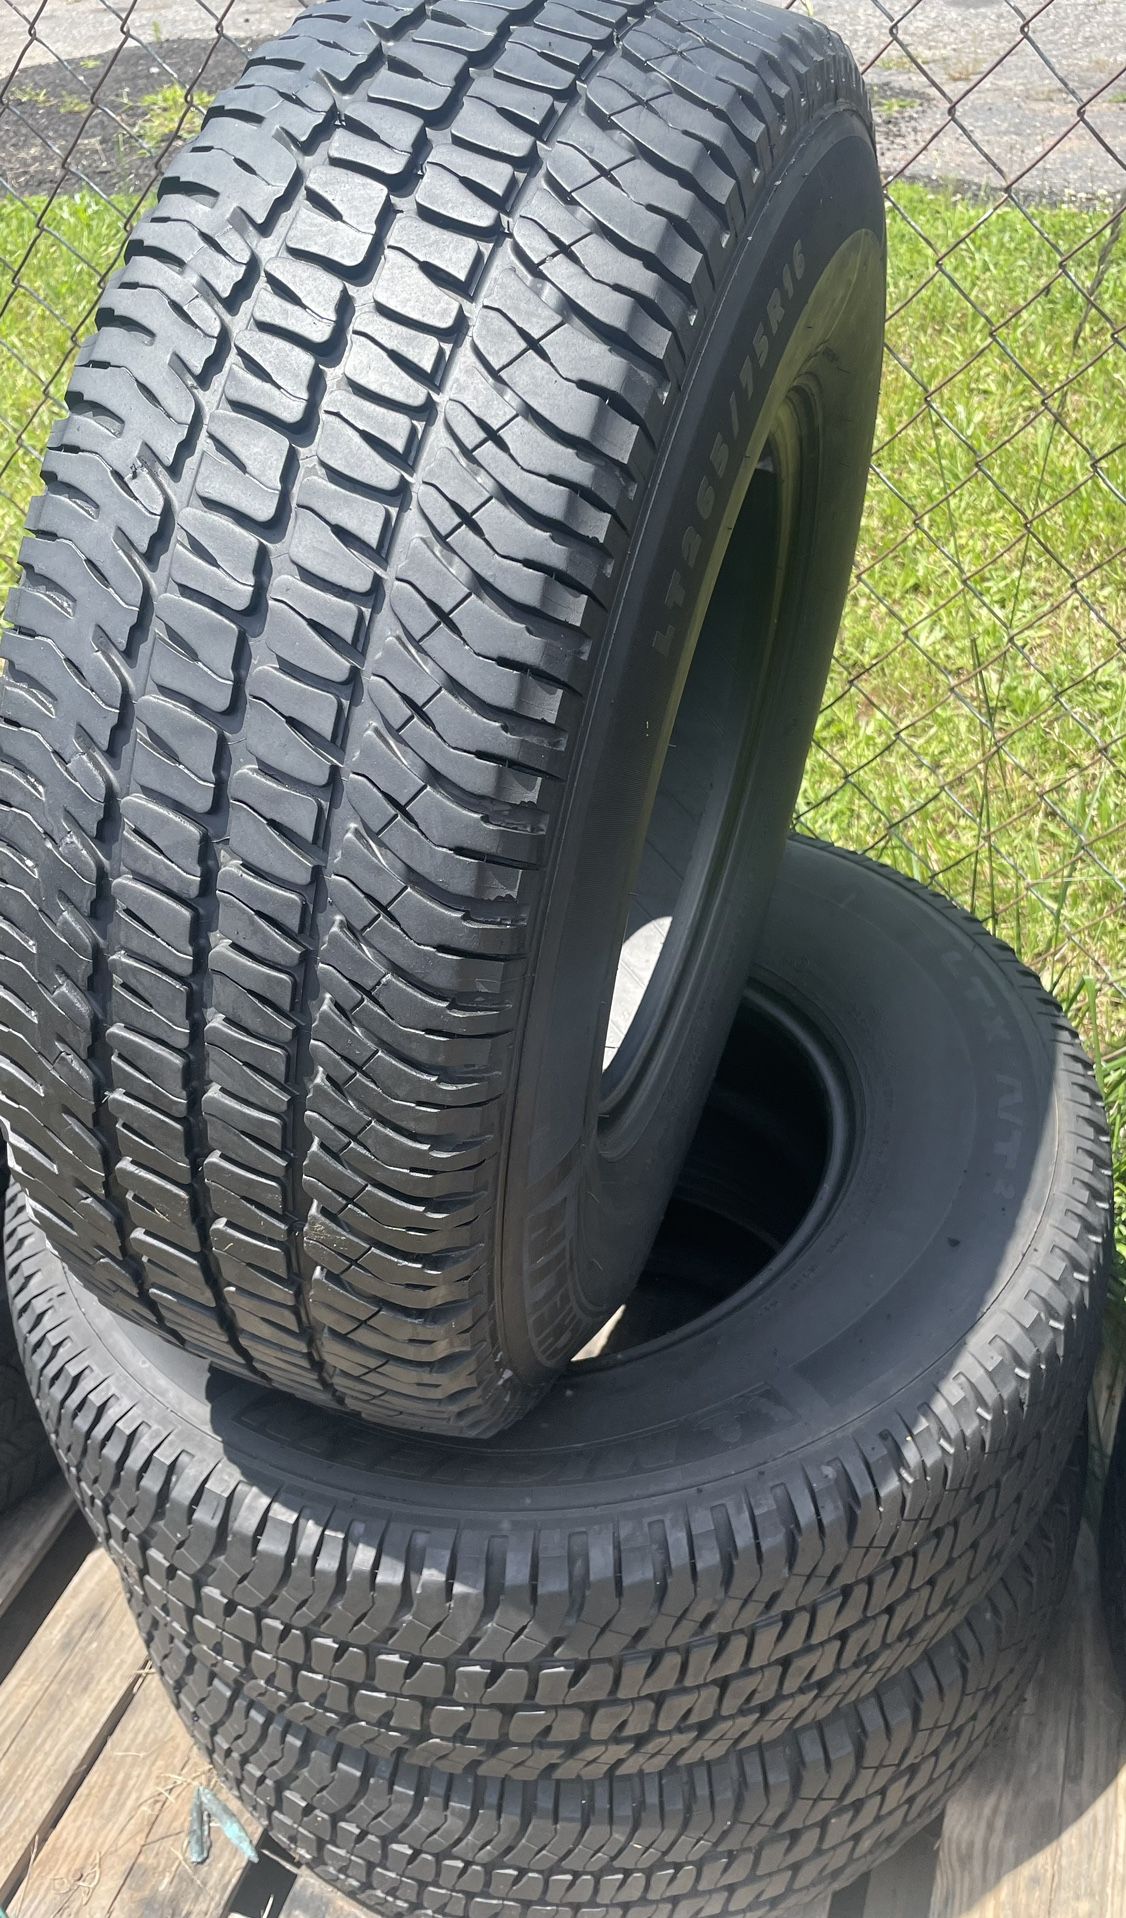 Used tires LT 265/75/16 Michelin $120 each tire 